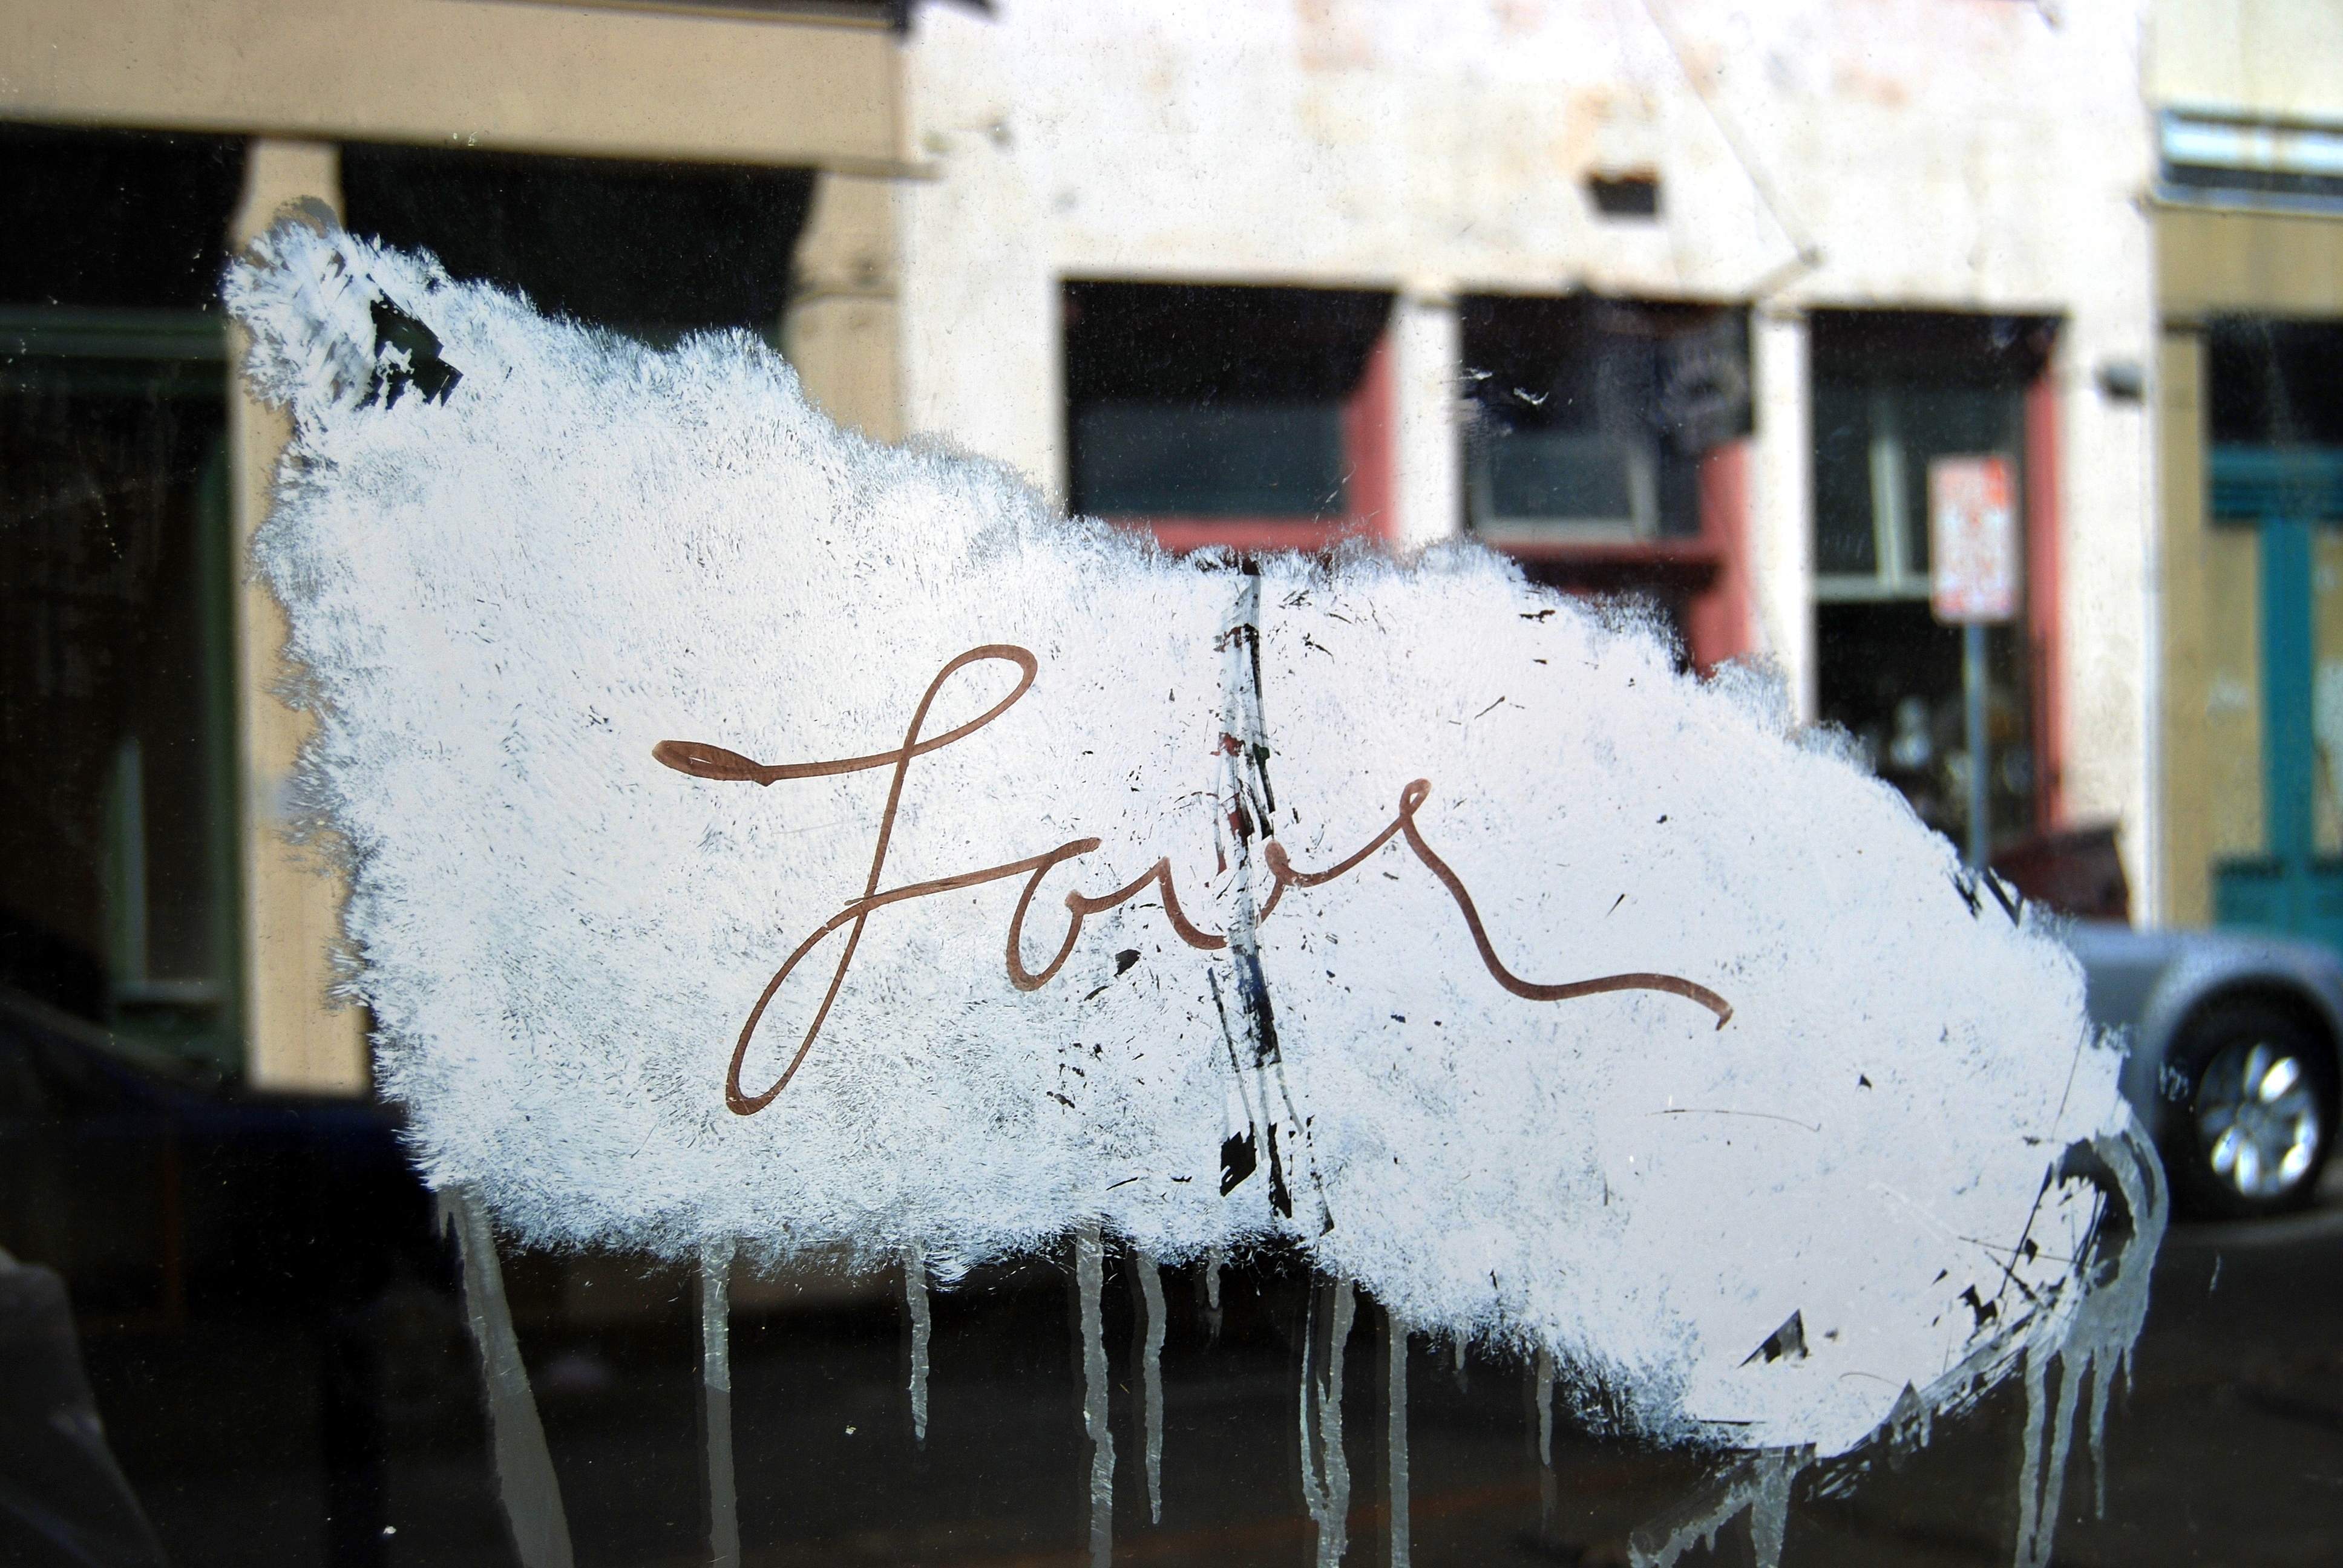 The word "love" written in cursive across a photo of a street